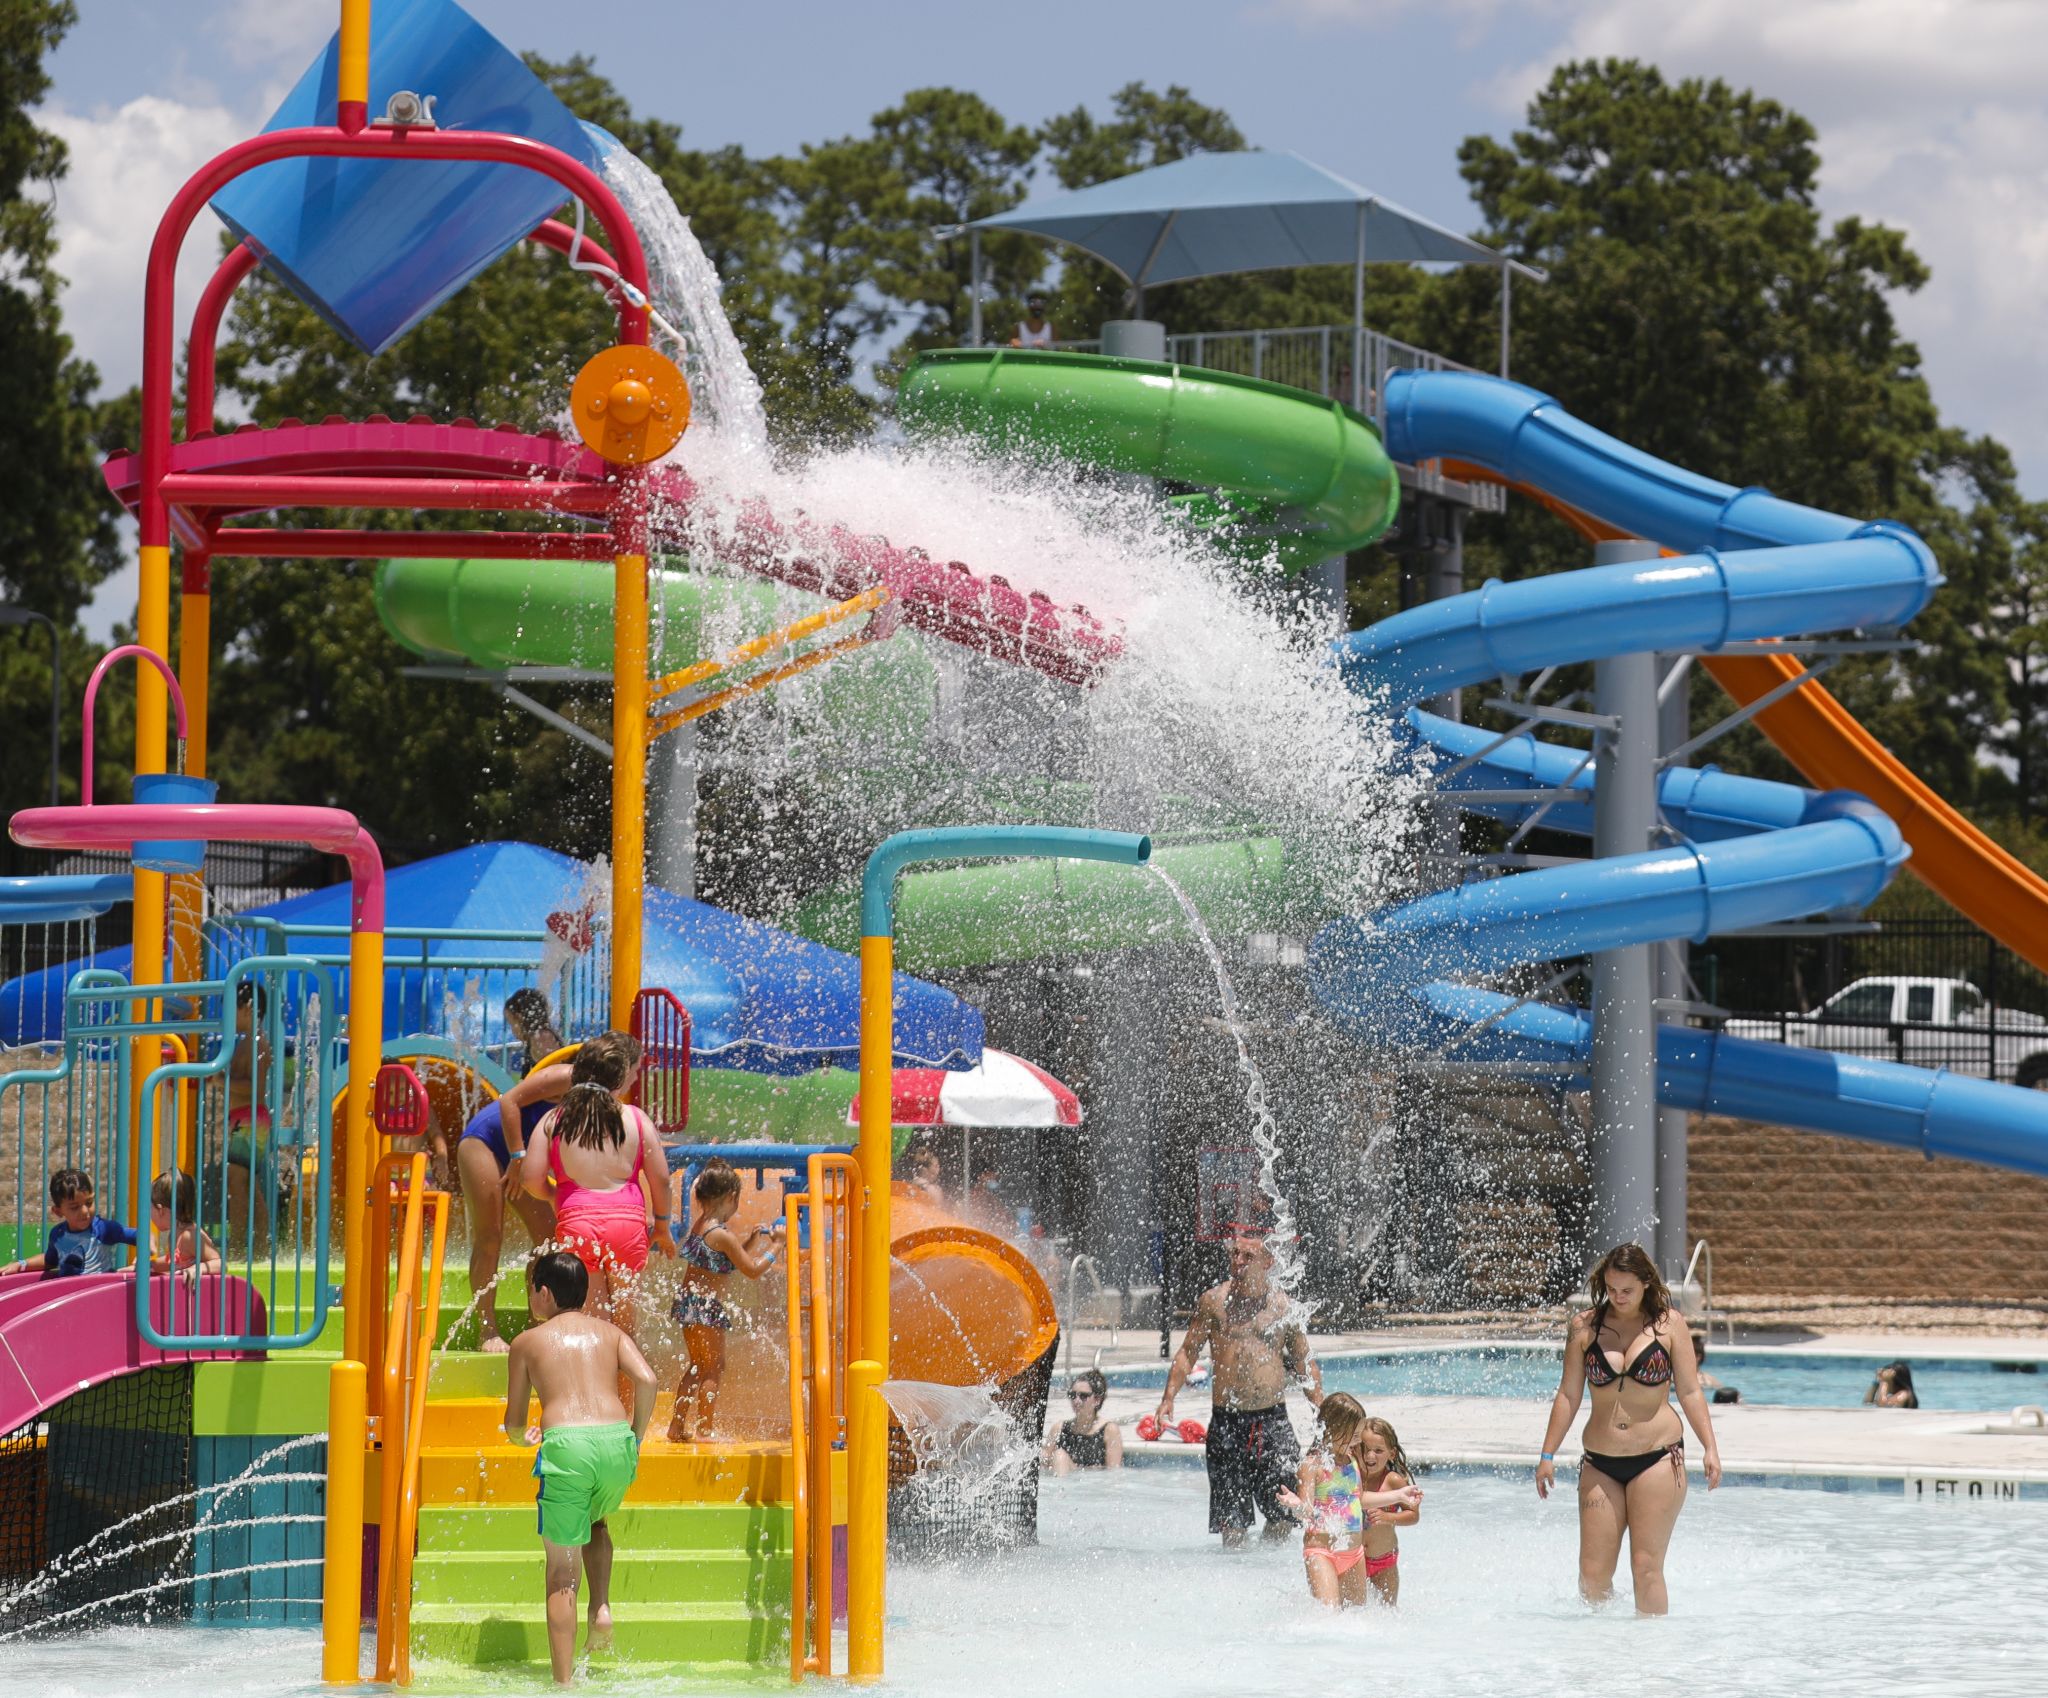 Photos Conroes New 54 Million Waterpark Opens To The Public 3235